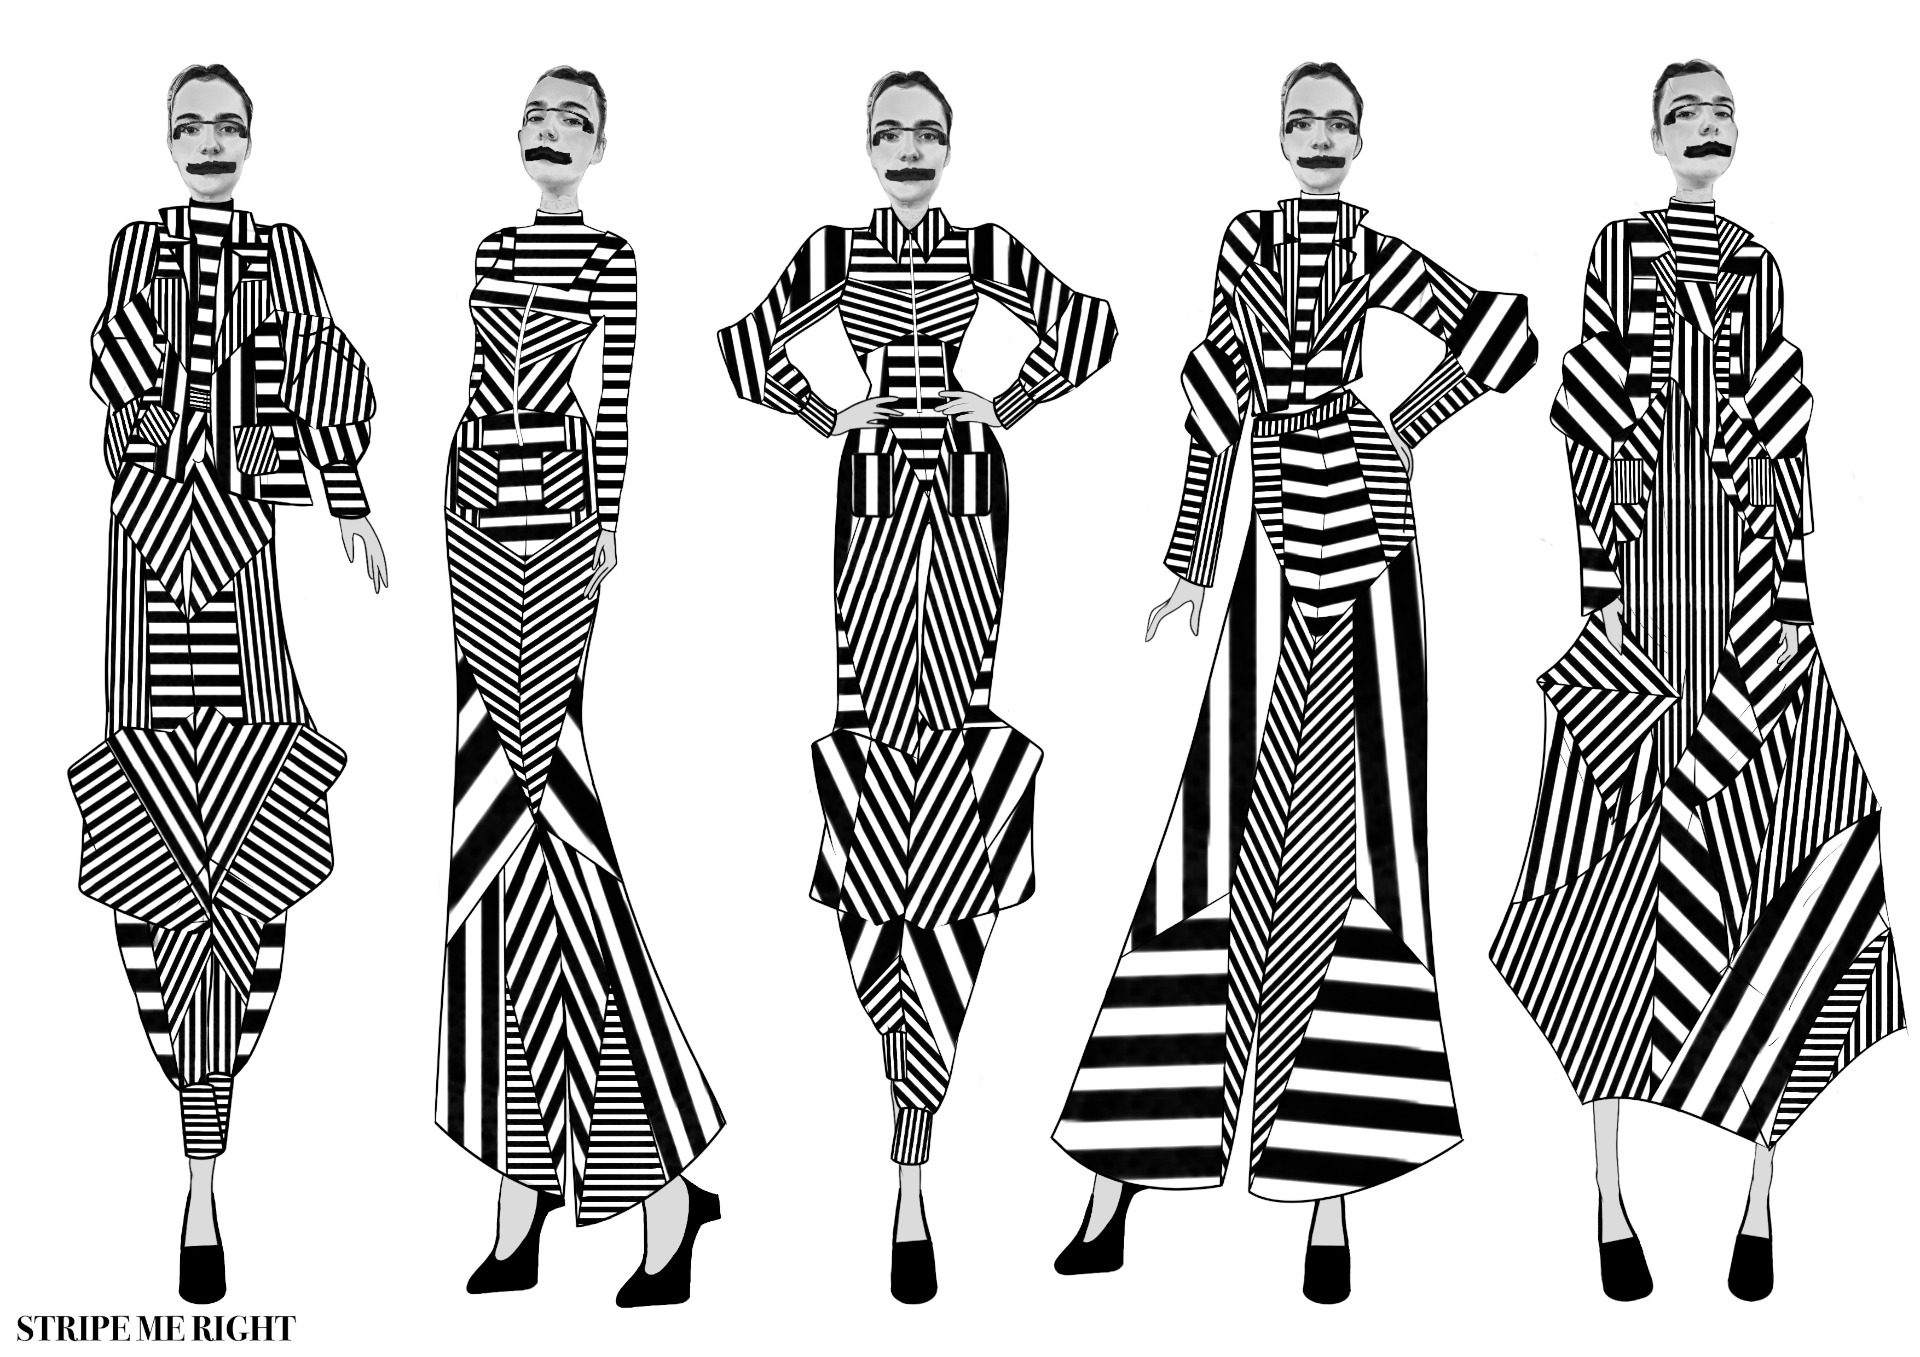 Five illustrations of black-and-white striped outfits